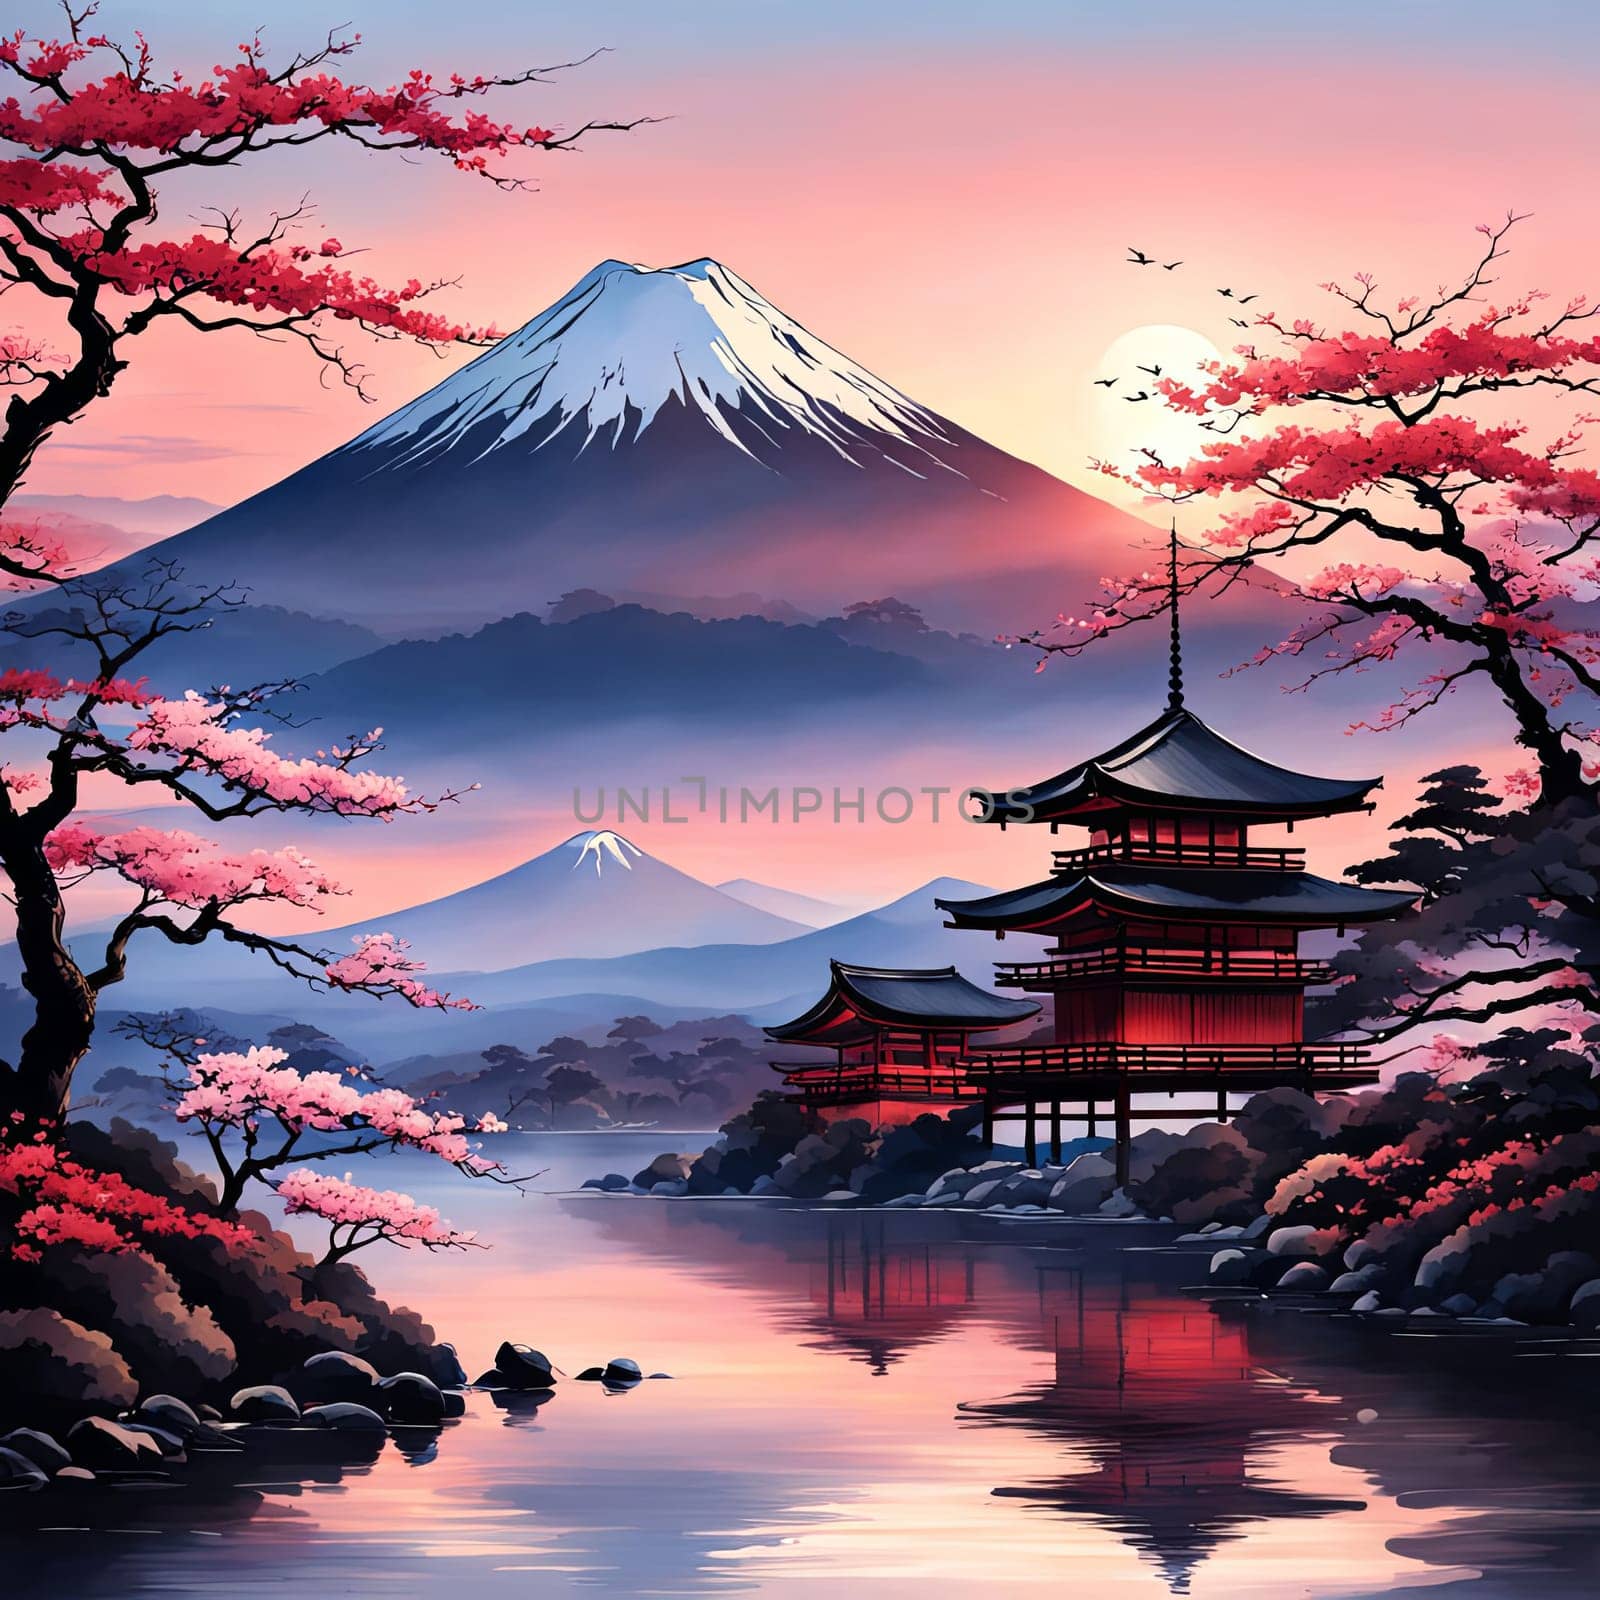 Japanese pagoda gracefully reflected on tranquil surface of lake, surrounded by lush greenery, embodying sense of peace, harmony. For interior, commercial spaces to create stylish atmosphere, print